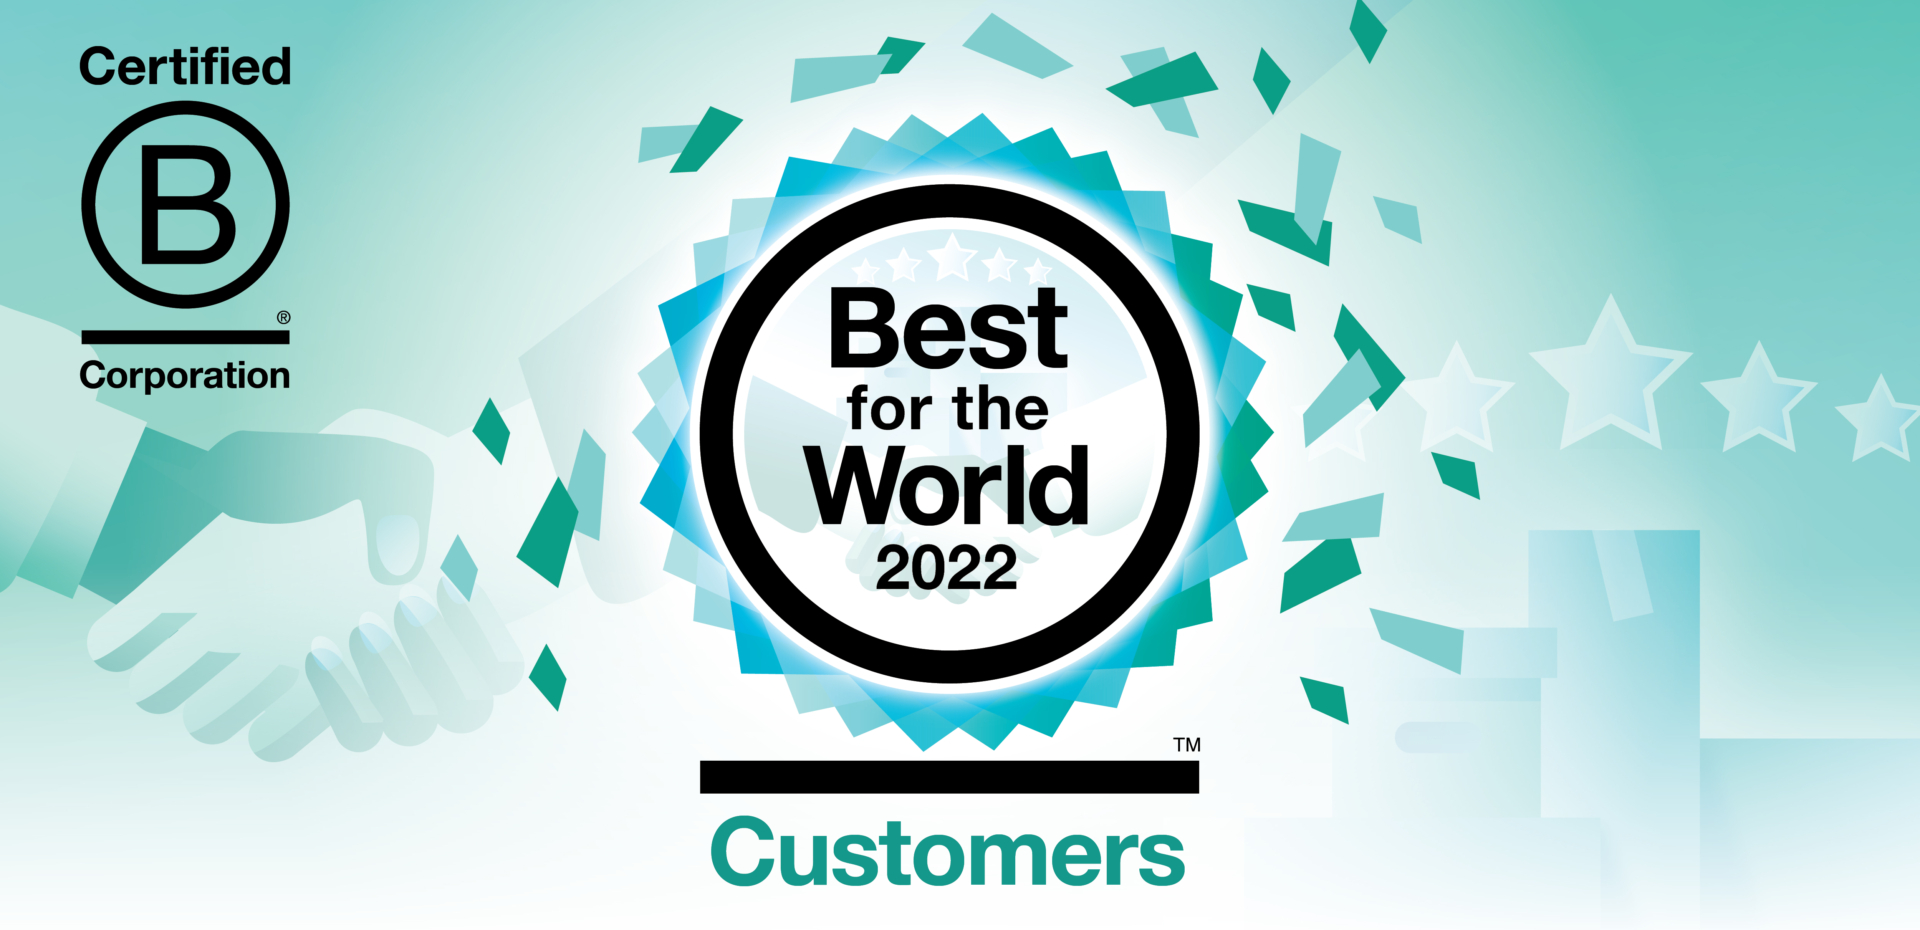 Best for the World 2022 Customers